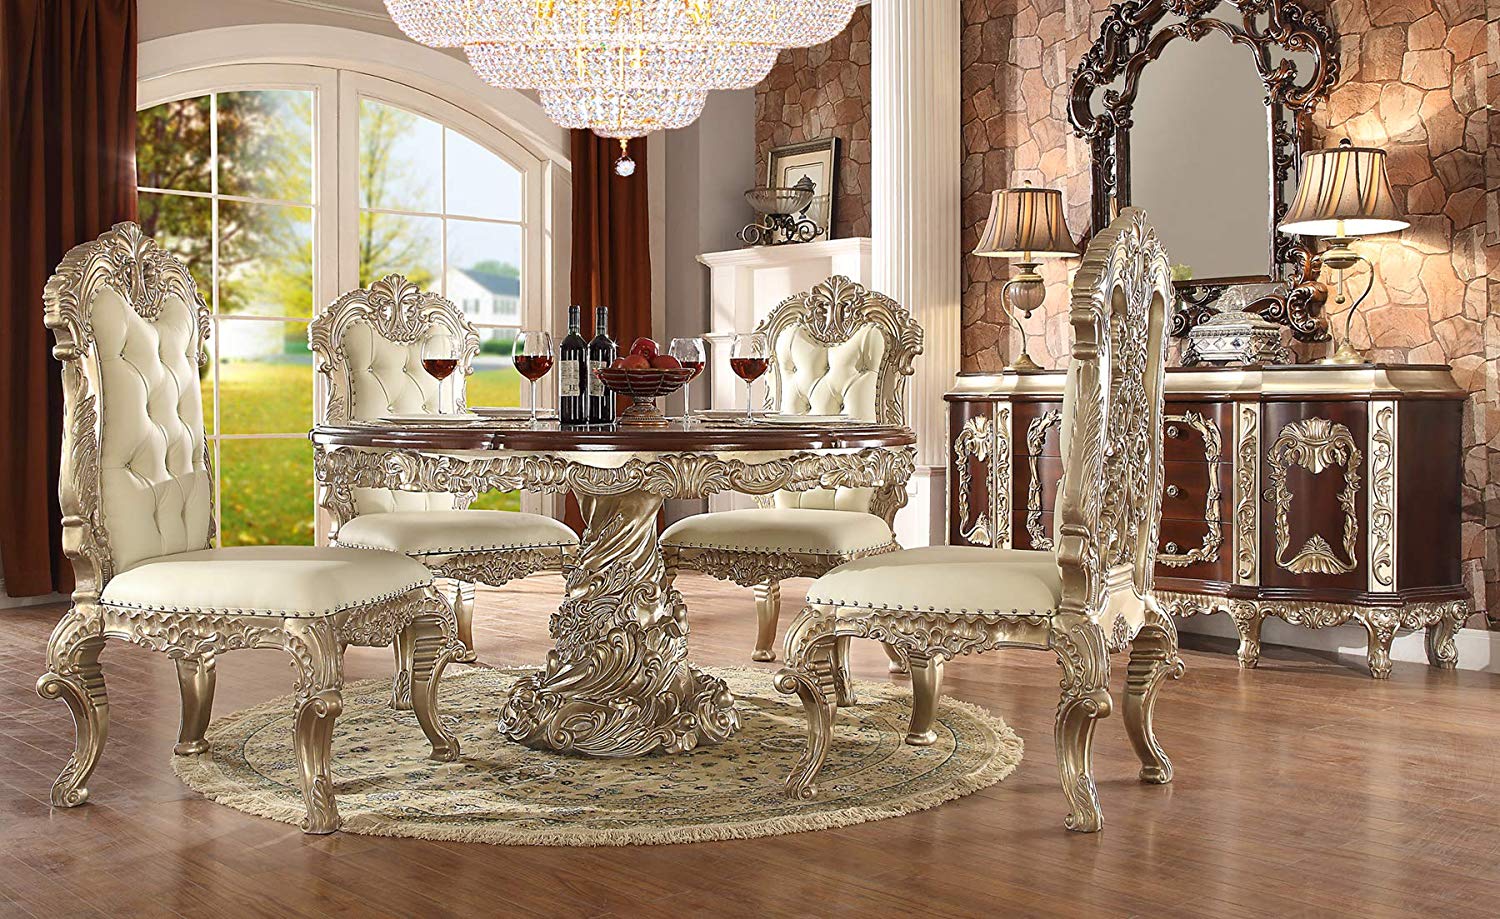 upscale dining room ideas